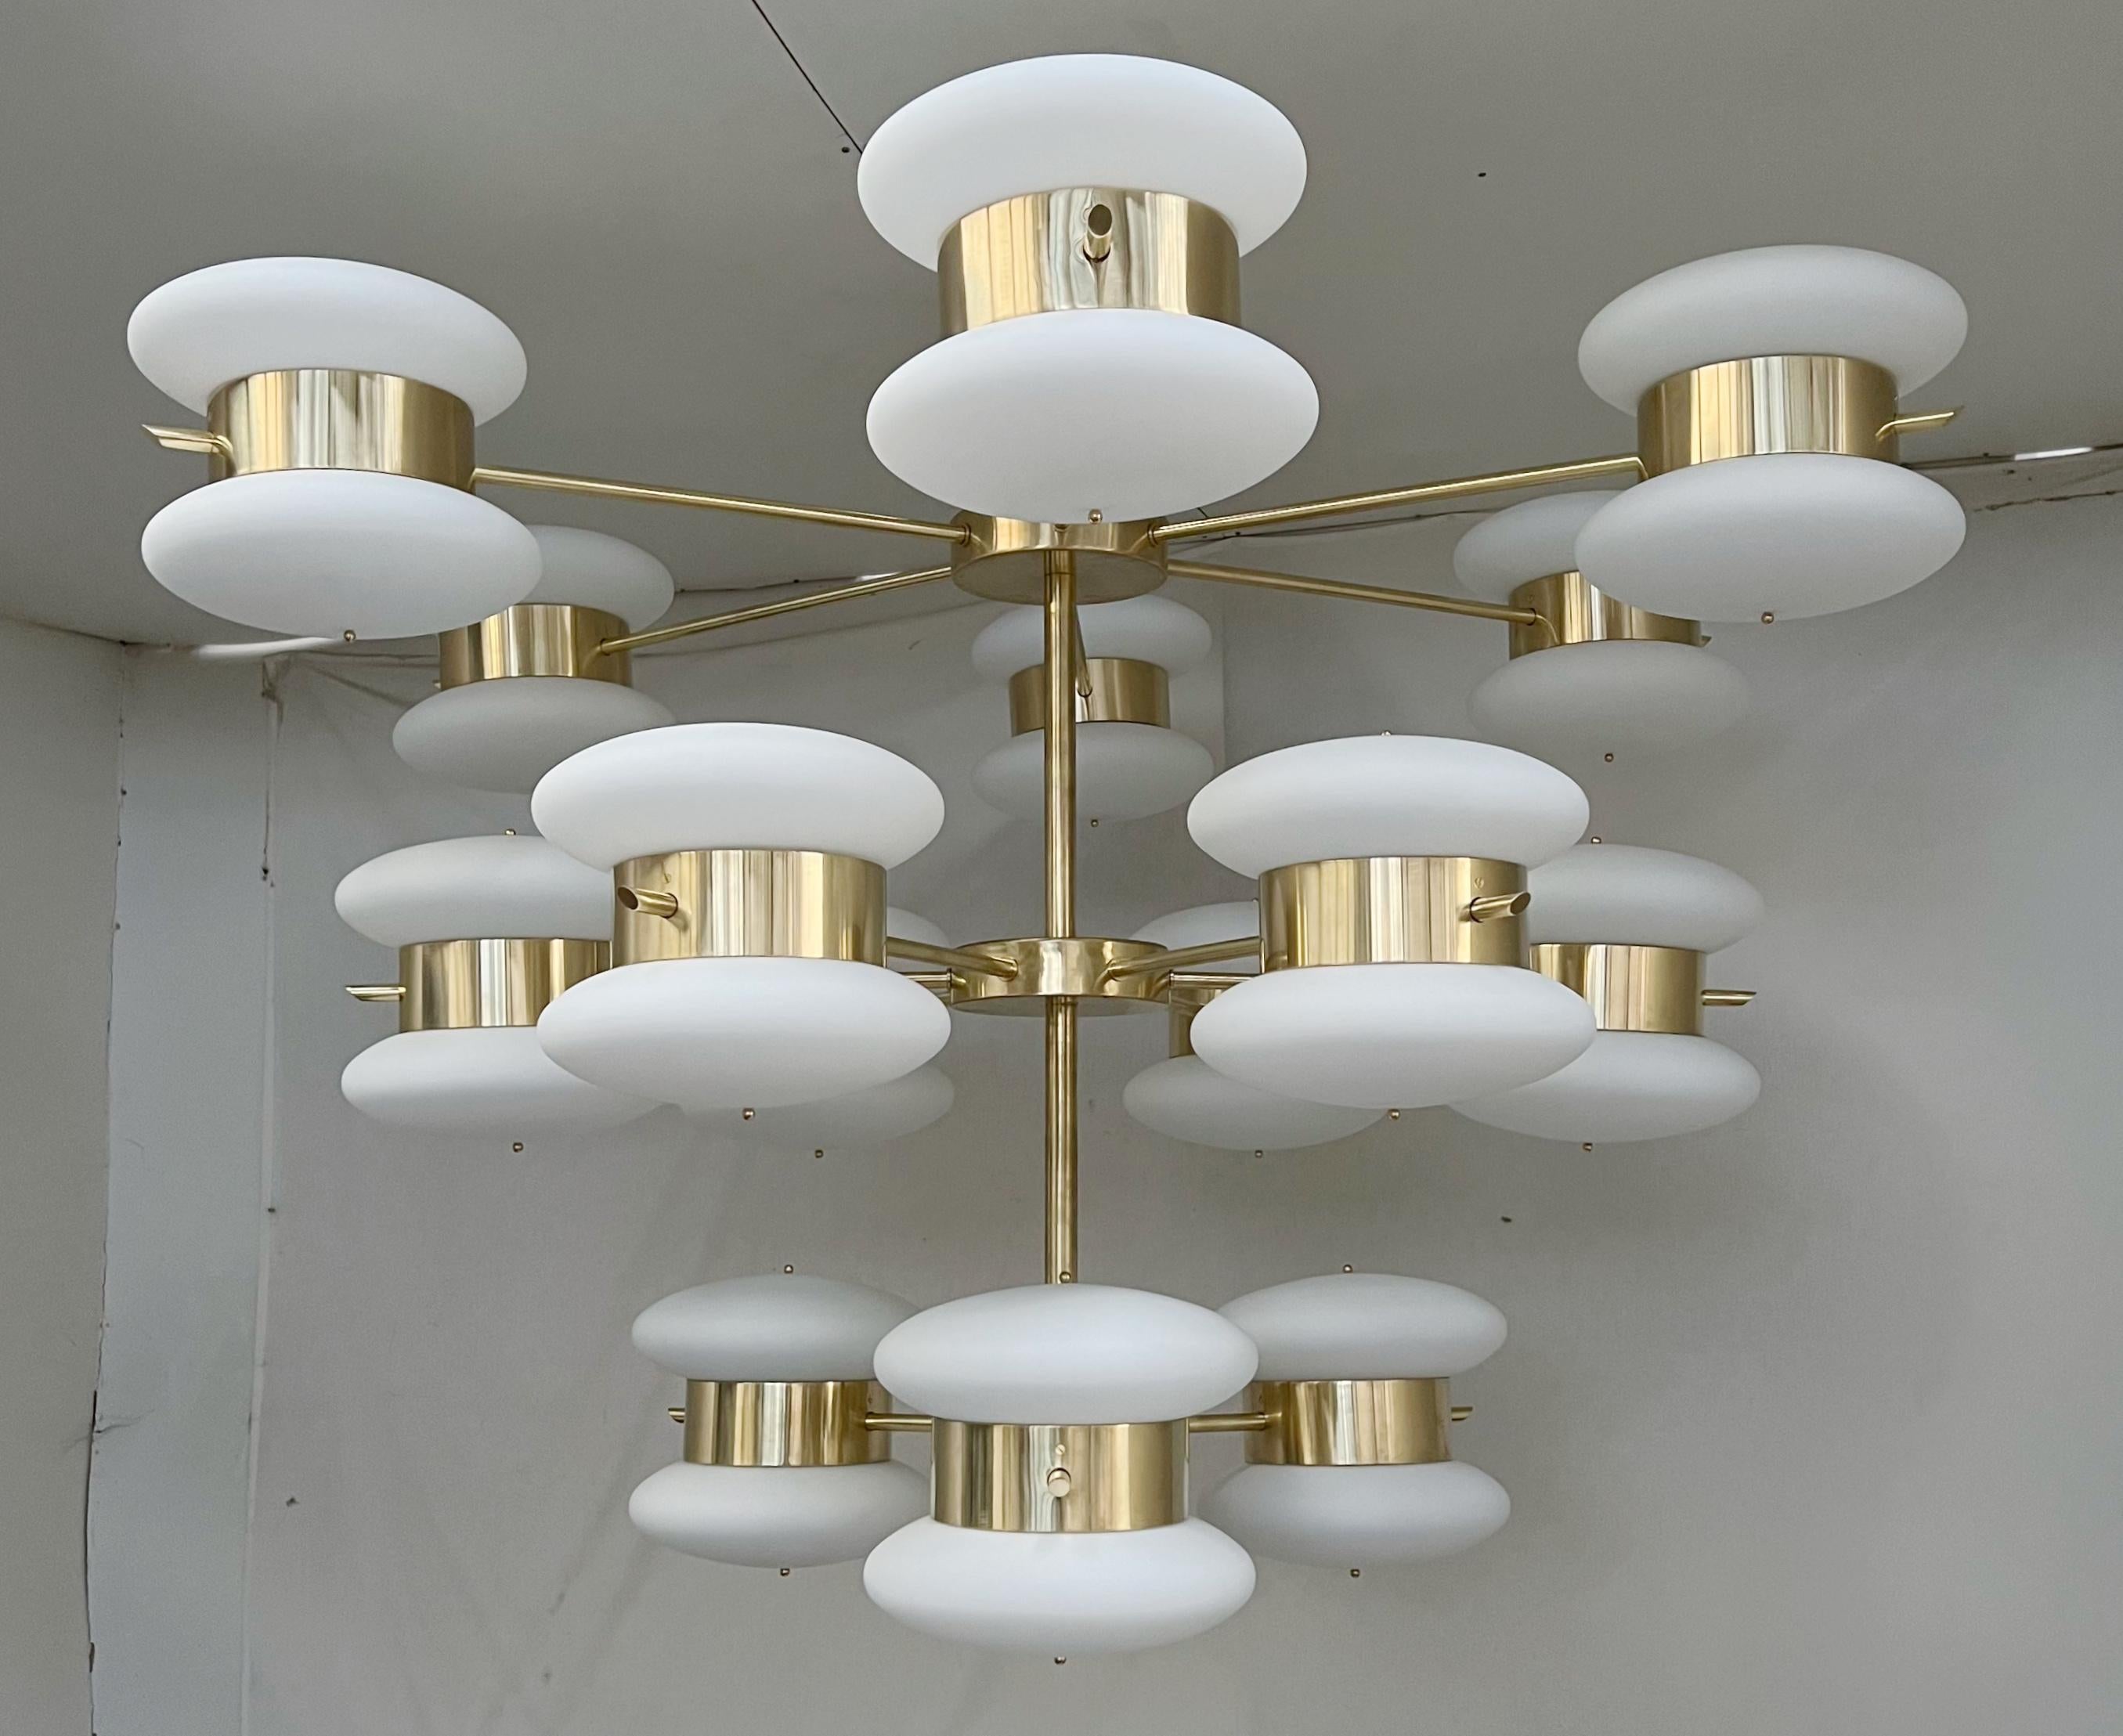 Italian midcentury style chandelier with 3 tiers of opaline matte white Murano glass shades mounted on cascading structure in natural brass finish / Made in Italy
30 lights / E12 or E14 type / max 40W each
Measures: Diameter 63 inches, height 48